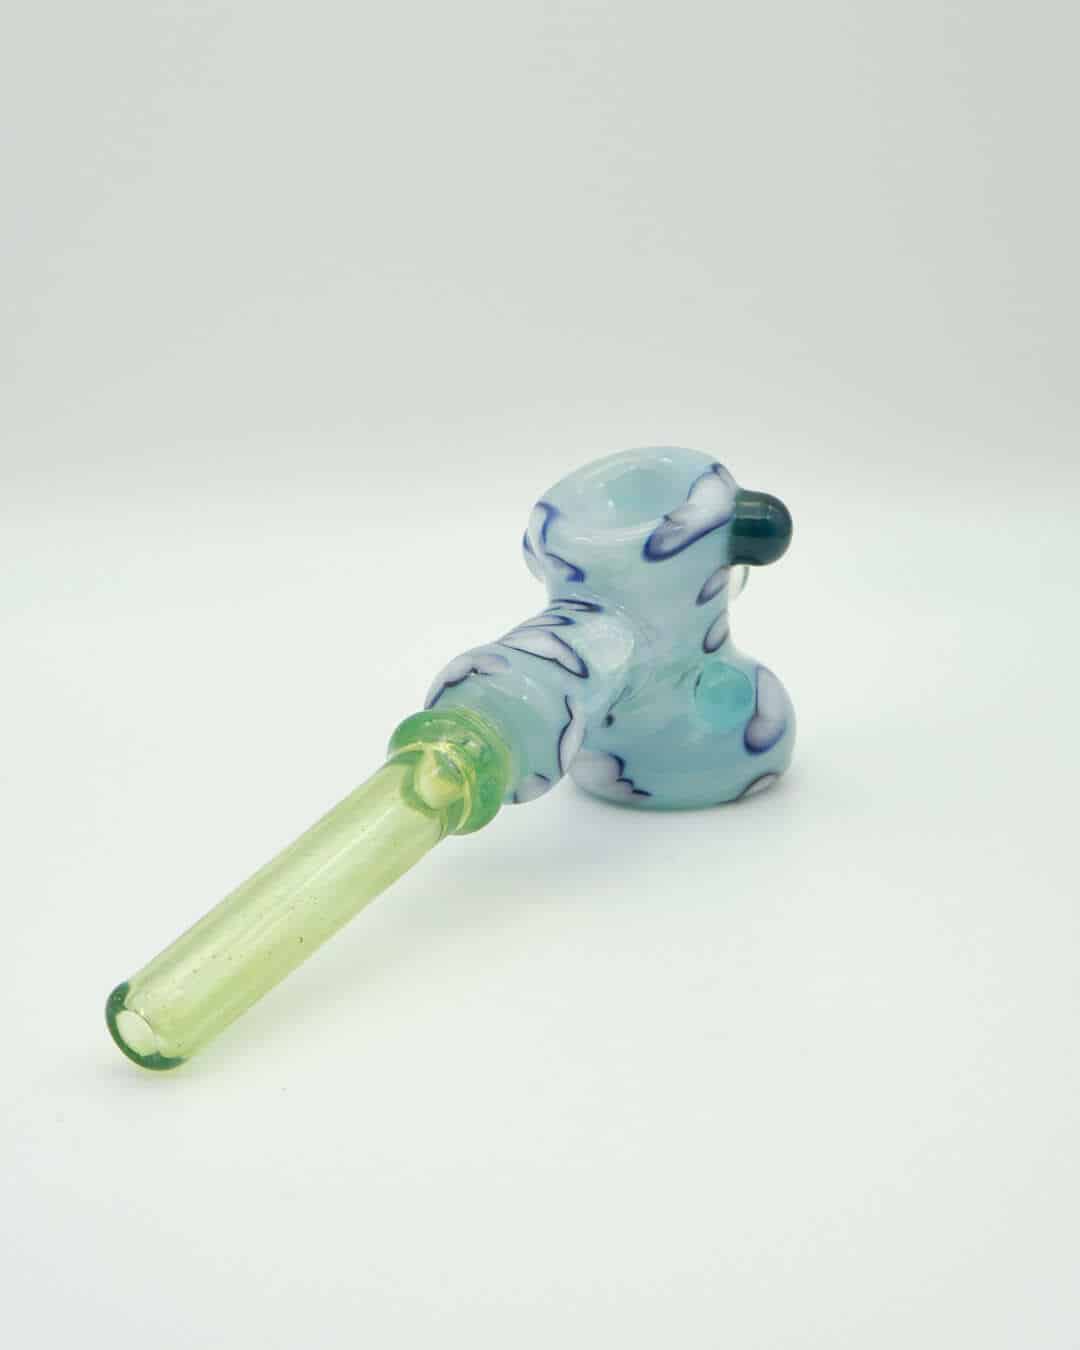 meticulously crafted design of the Hammer Pipe by Gnarla Carla